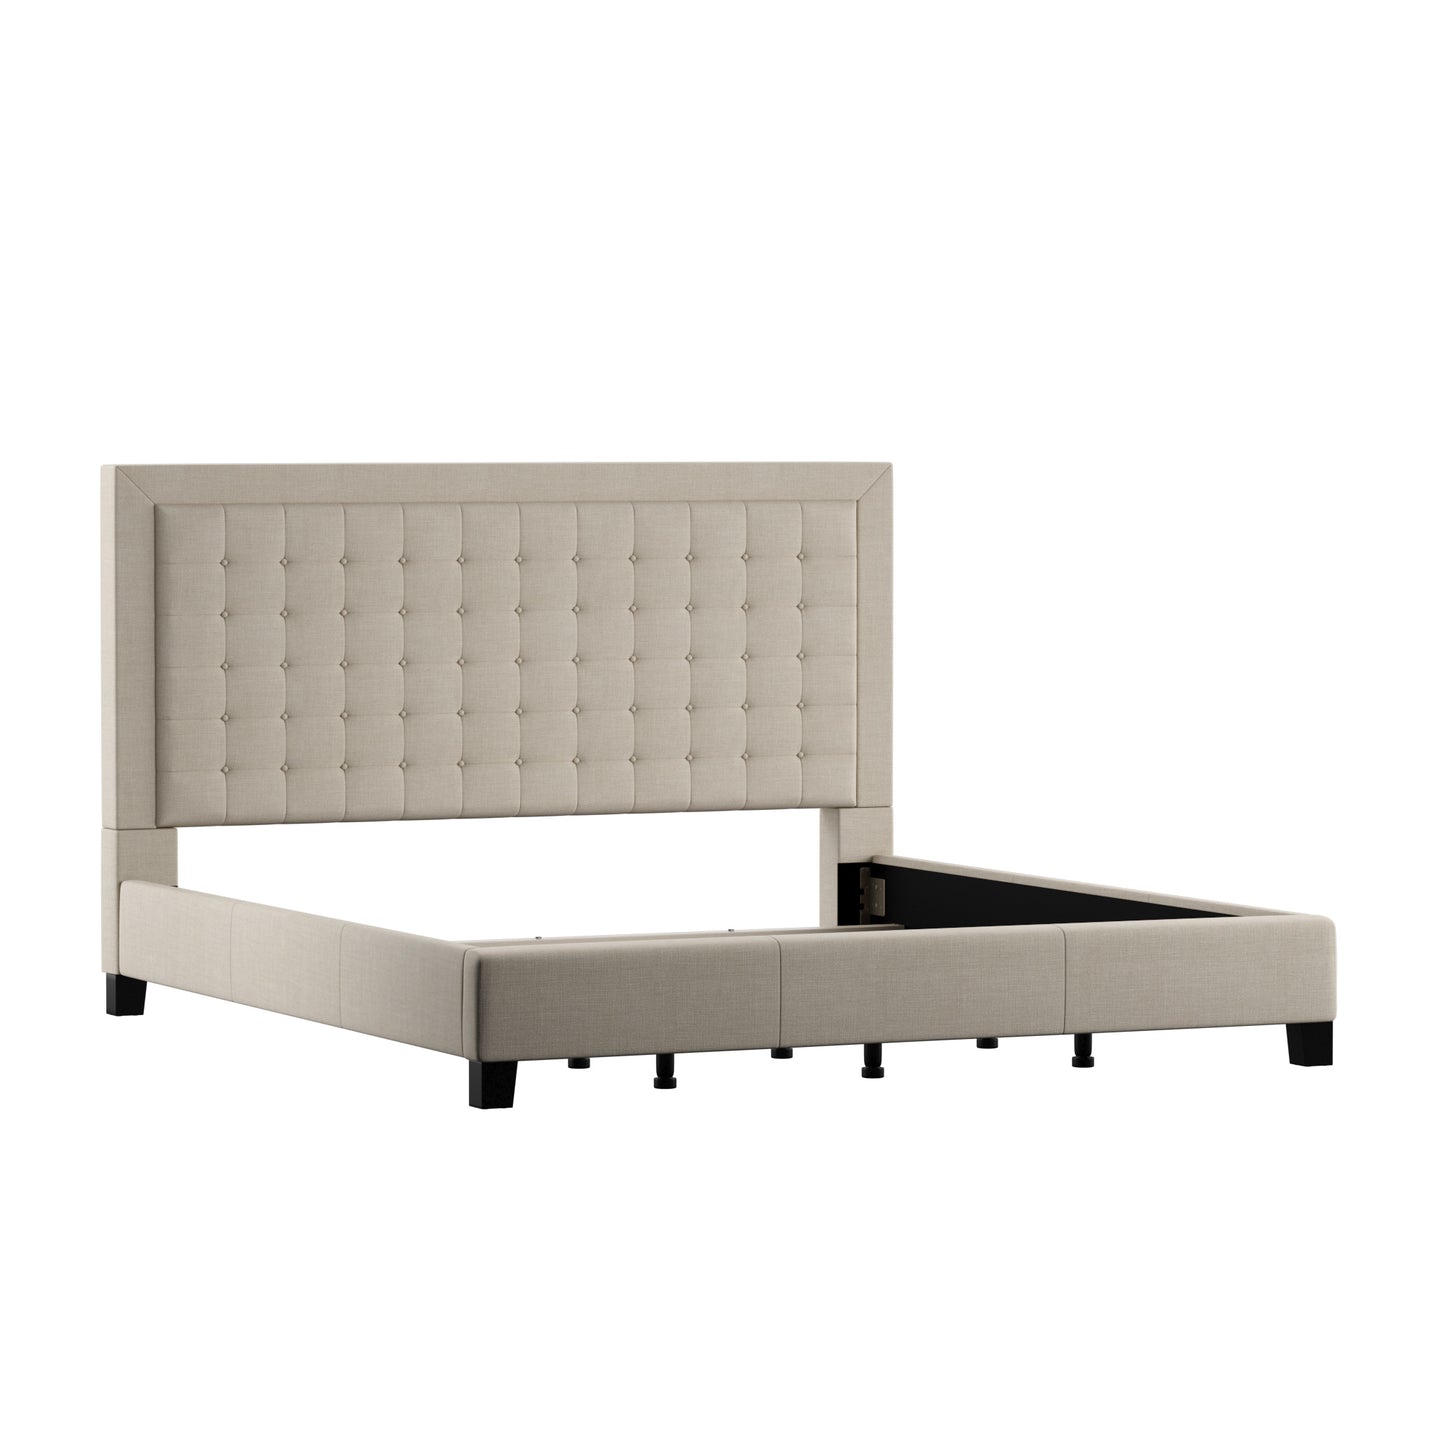 Square Button-Tufted Upholstered Bed - Beige, King